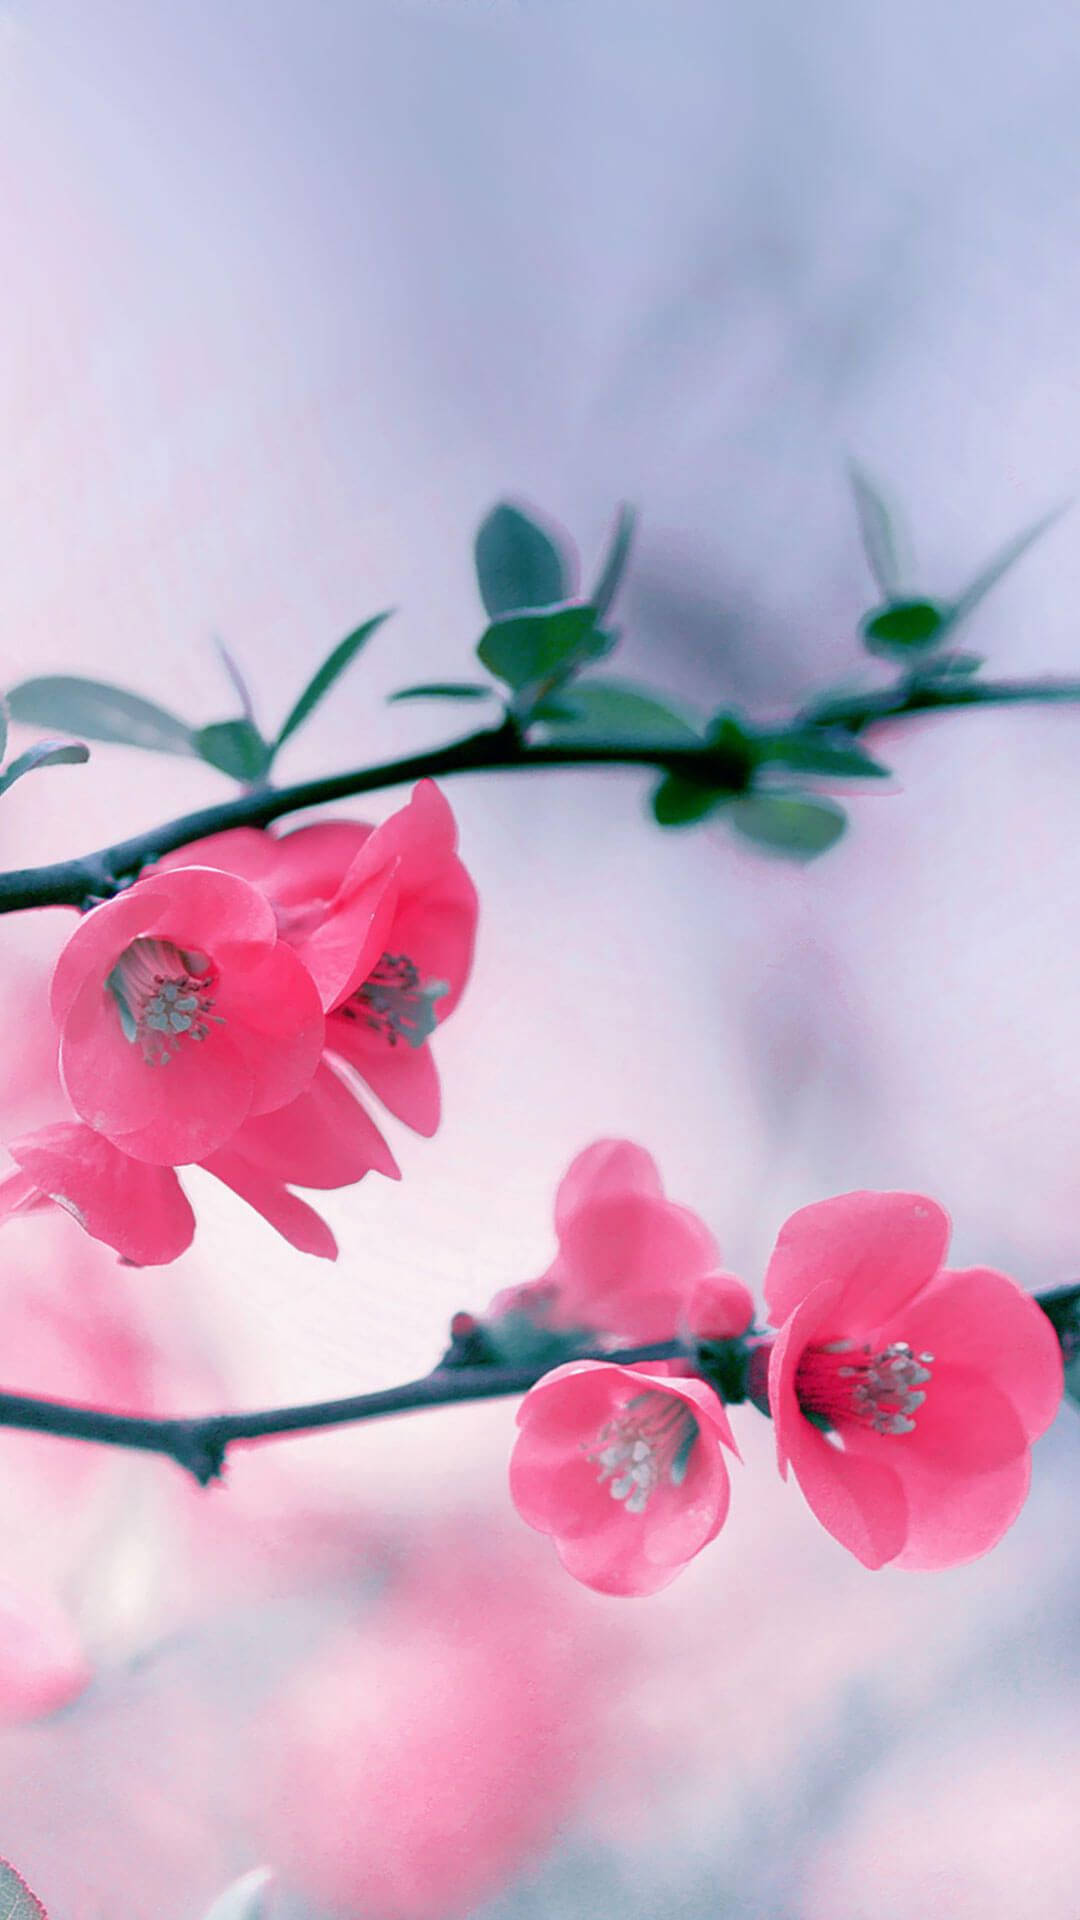 "Relish the beauty of nature with this spring flower iPhone wallpaper" Wallpaper